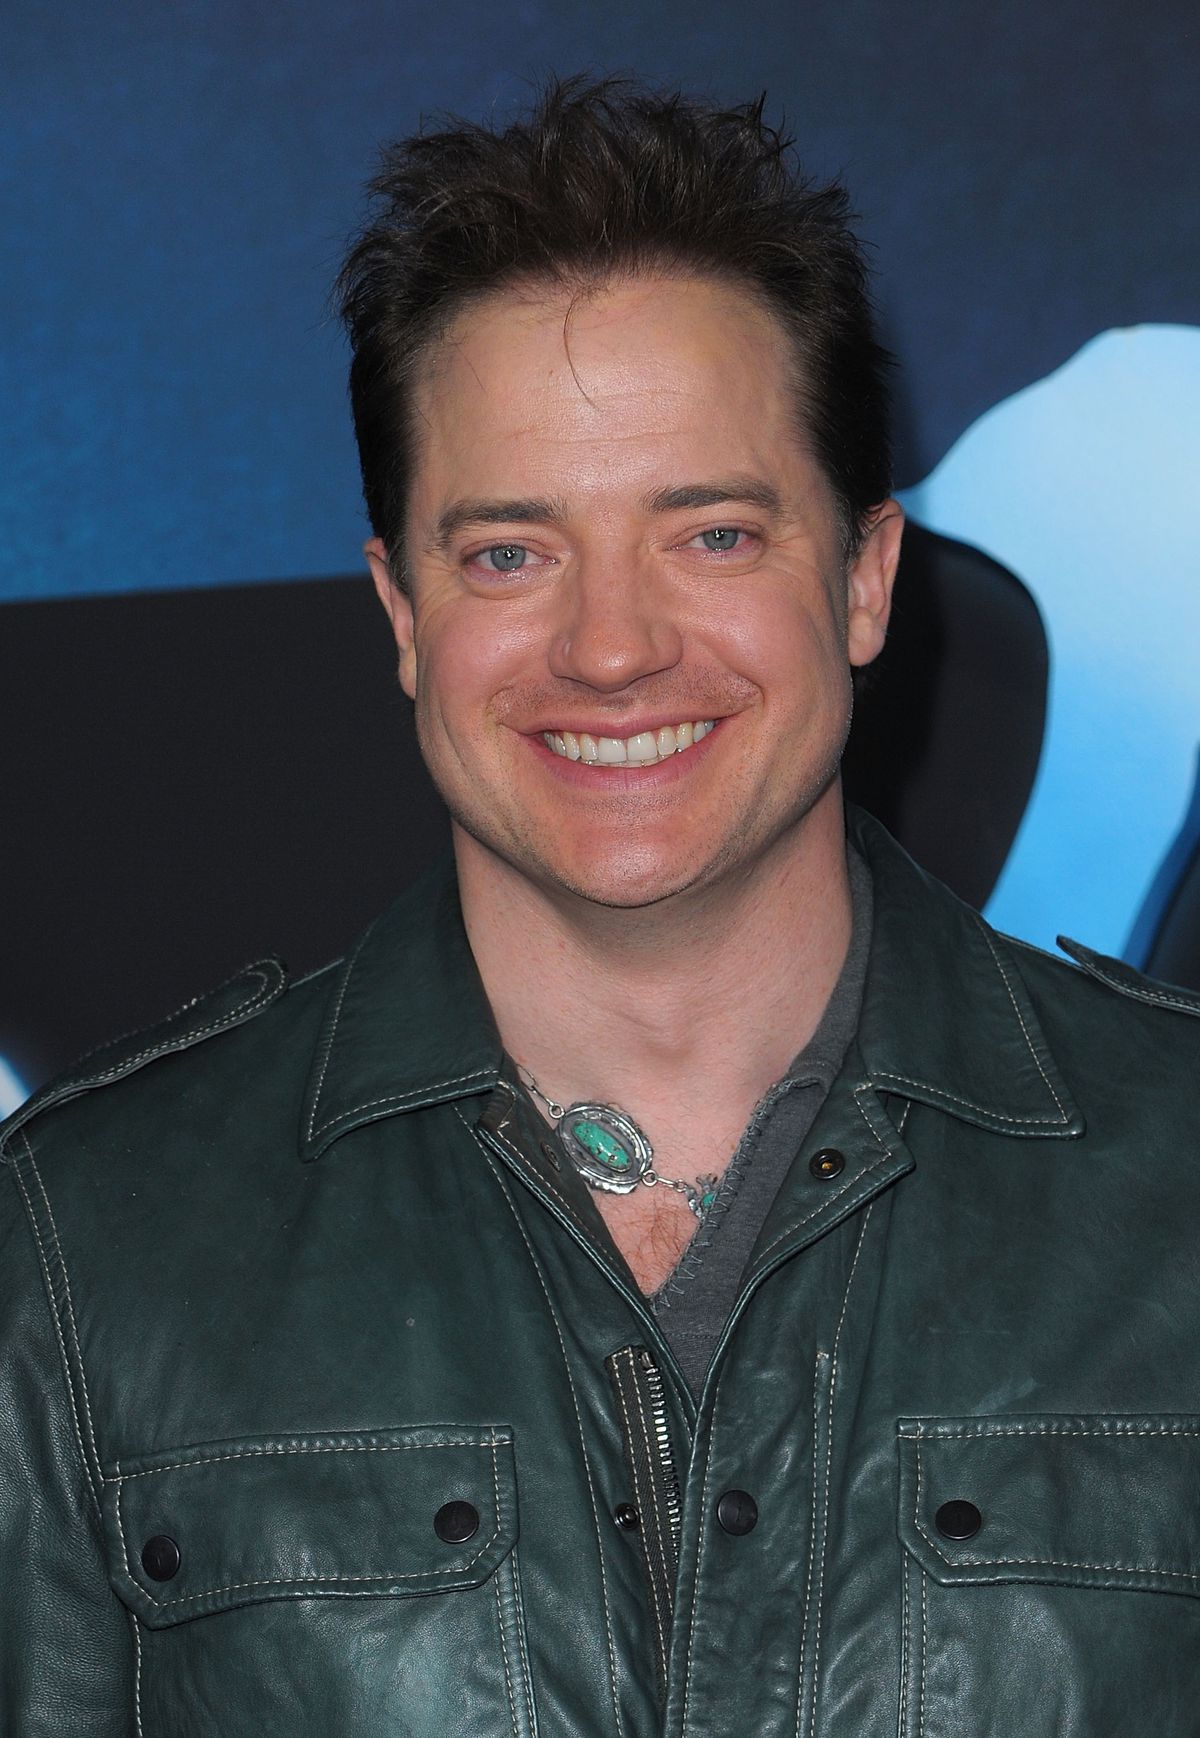 Brendan Fraser in a large green necklace and leather jacket at the Avatar premiere